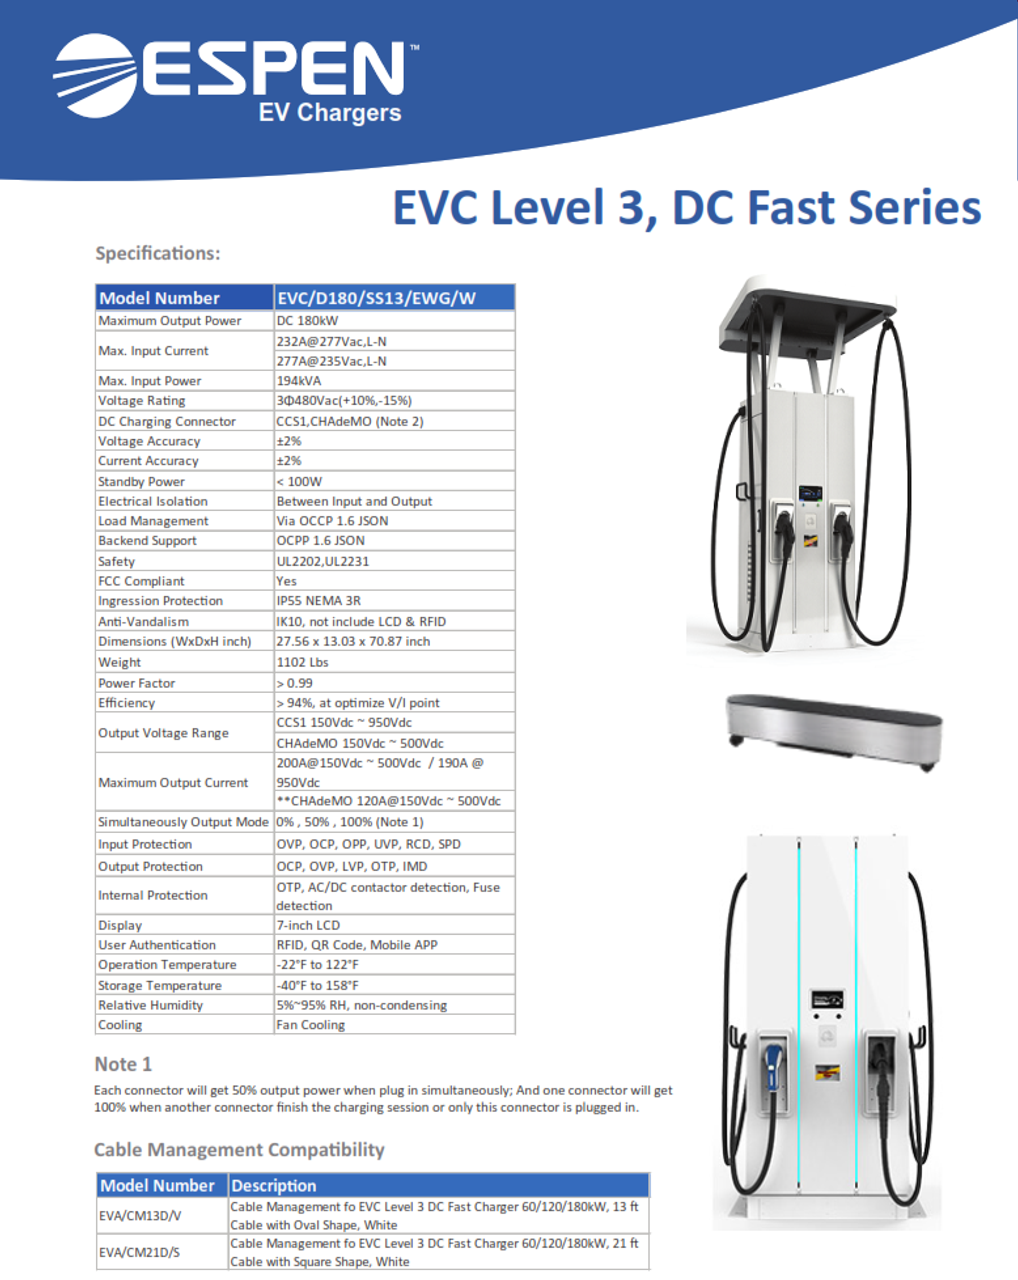 Level 3 DC Fast – 180KW, Commercial EV Charger